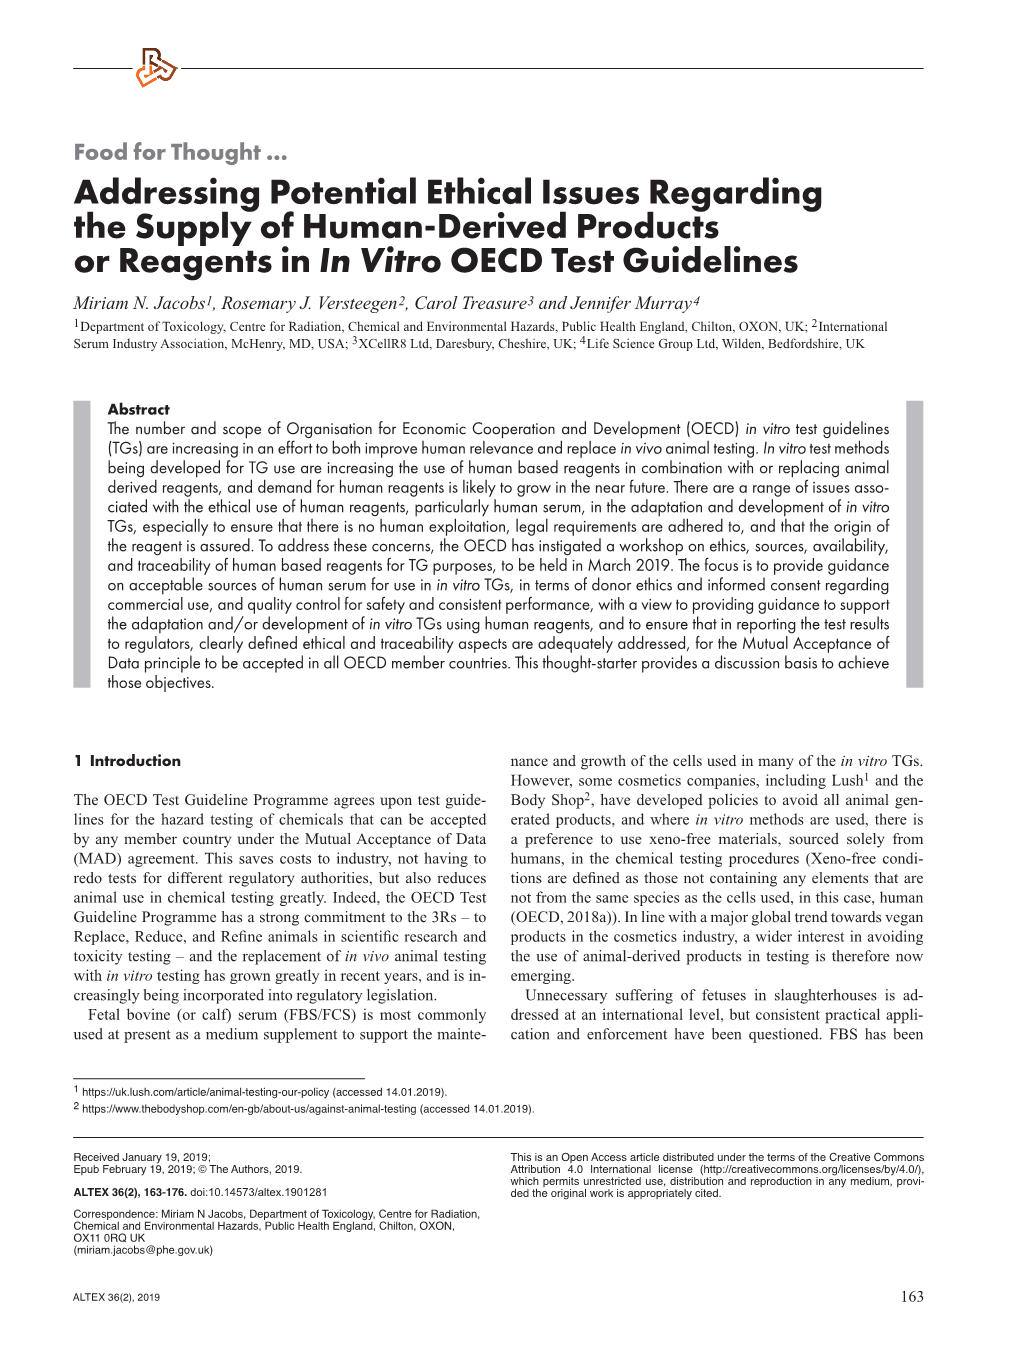 Addressing Potential Ethical Issues Regarding the Supply of Human-Derived Products Or Reagents in in Vitro OECD Test Guidelines Miriam N